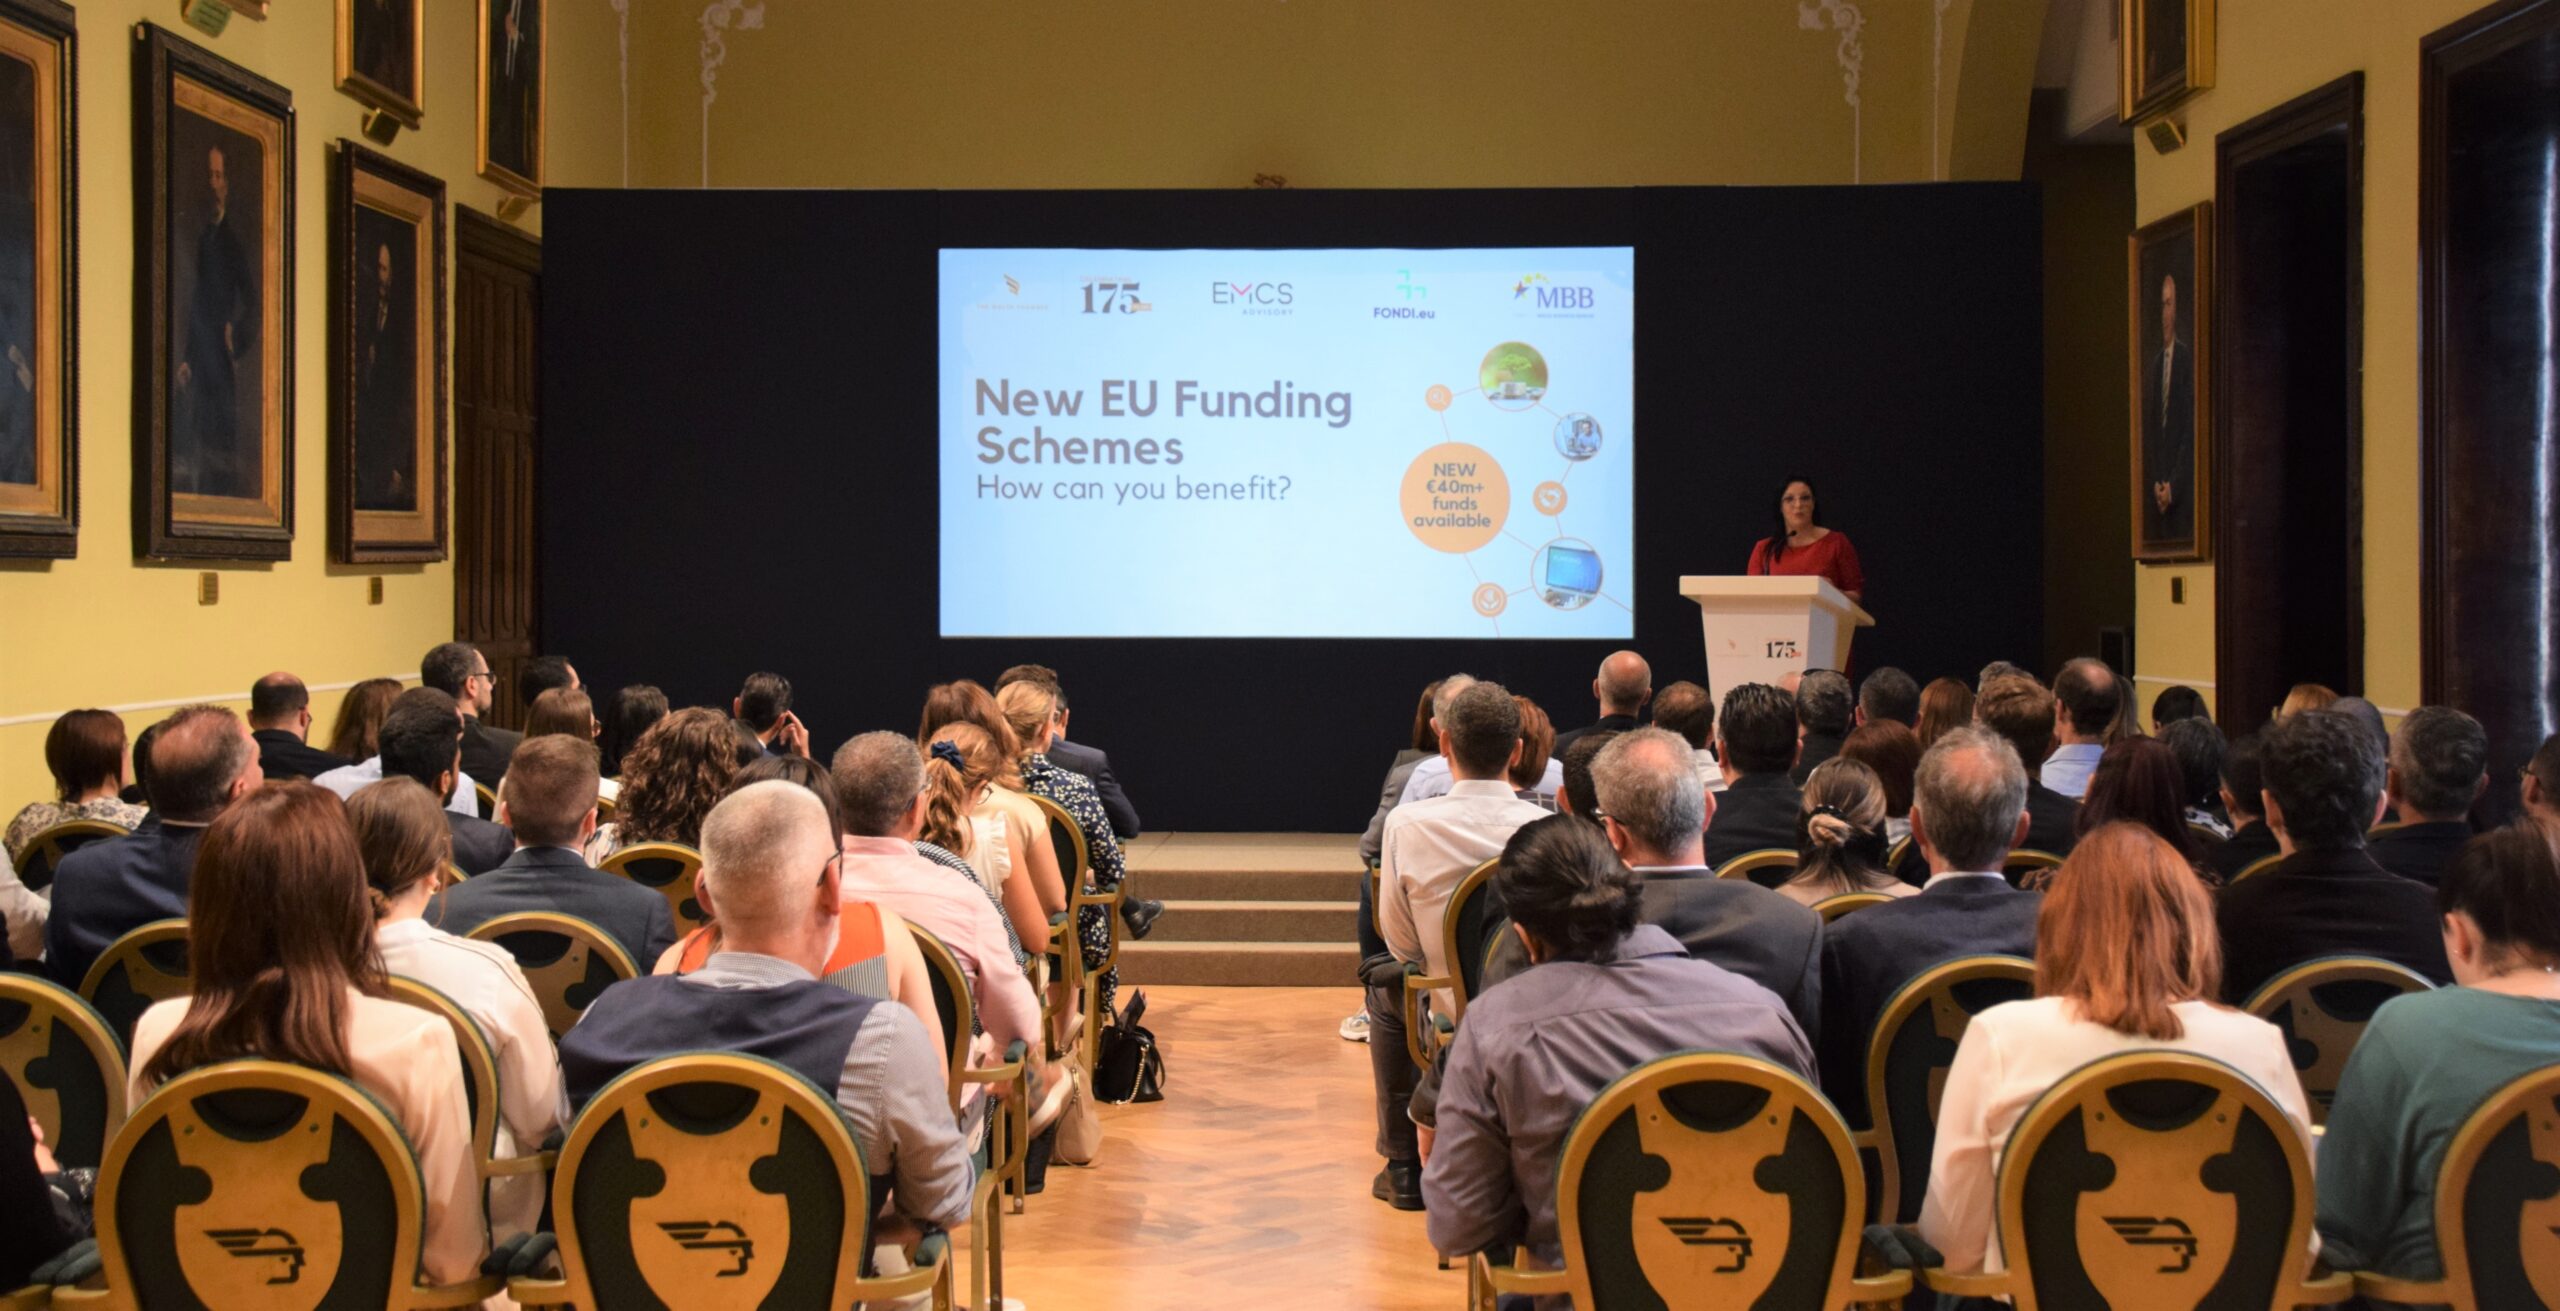 New EU Funding Schemes: How can you benefit?